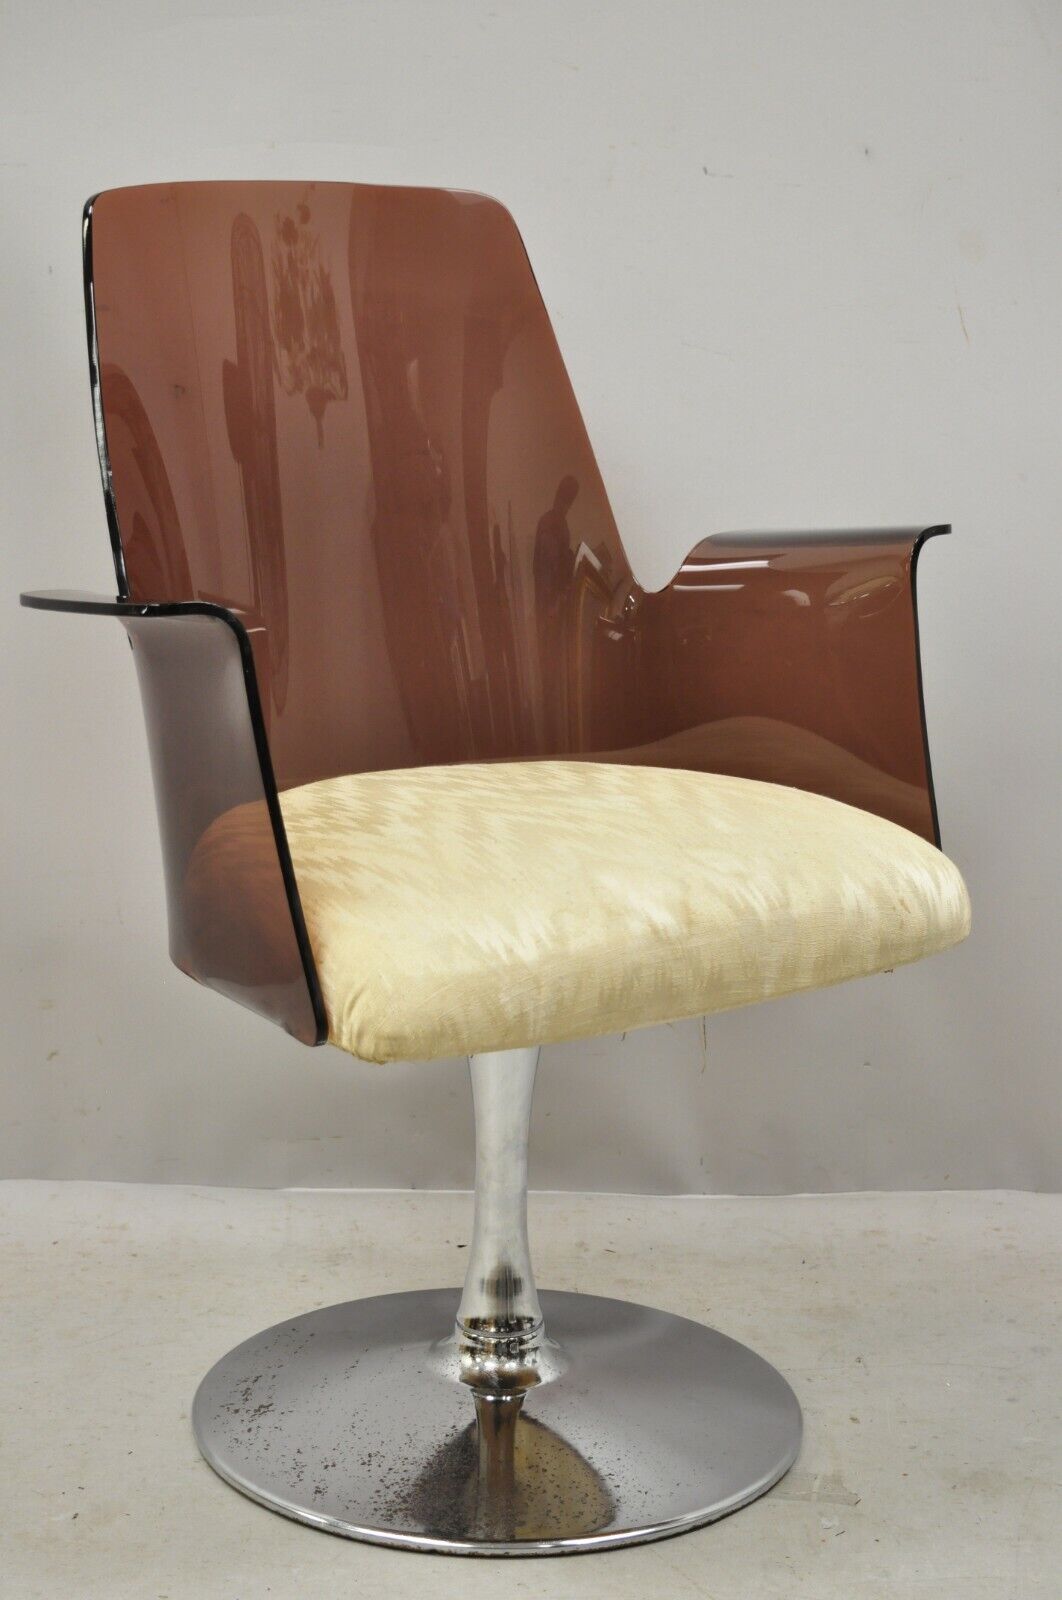 Vintage Laverne Style Curved Cranberry Lucite Tulip Swivel Base Arm Chair (A)